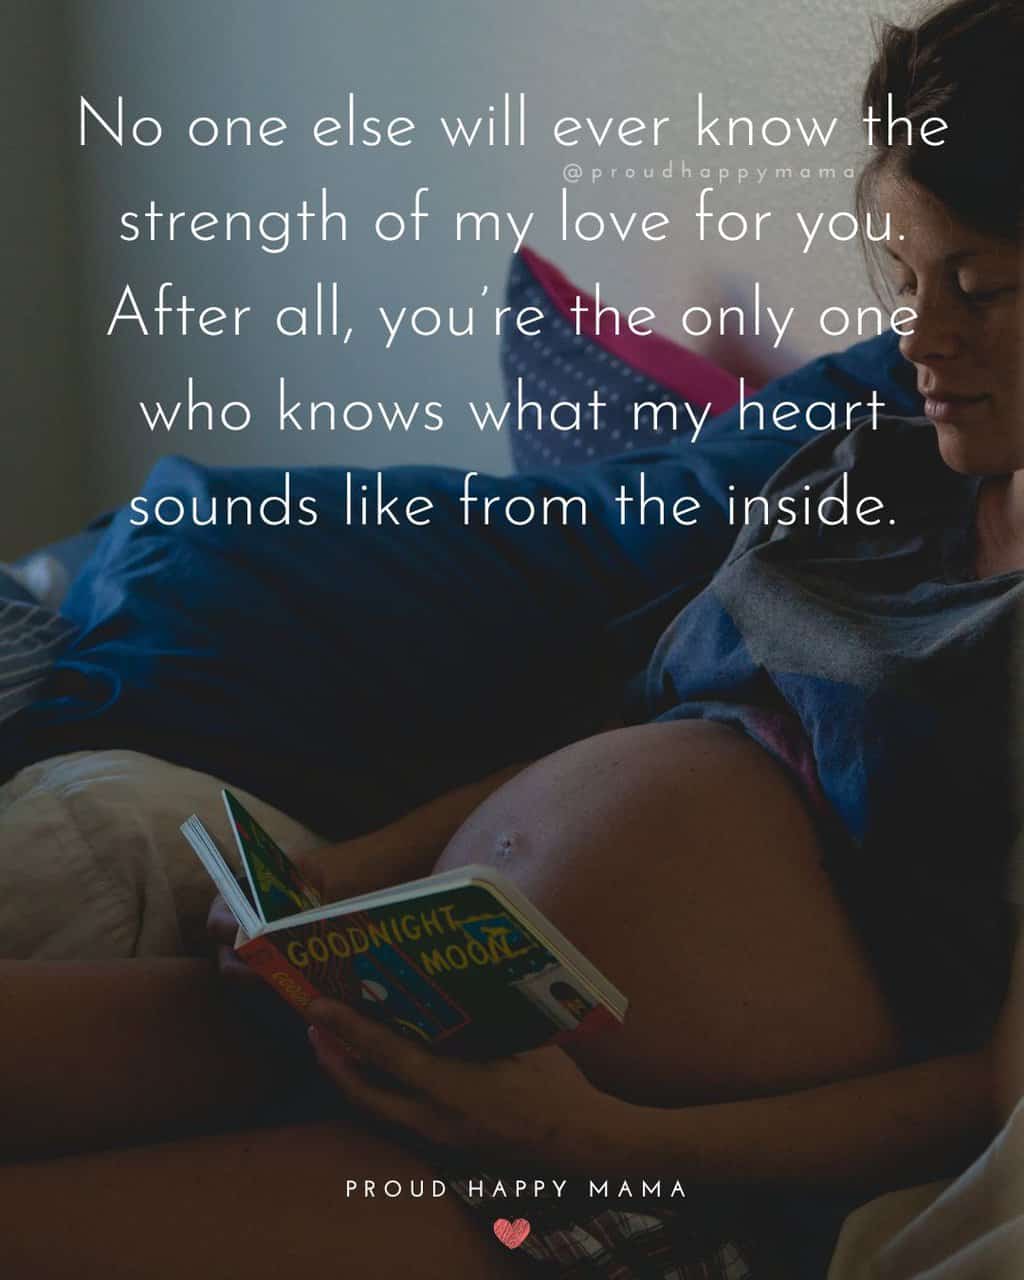 Mommy To Be Quotes And Sayings | No one else will ever know the strength of my love for you. After all, you’re the only one who knows what my heart sounds like from the inside.